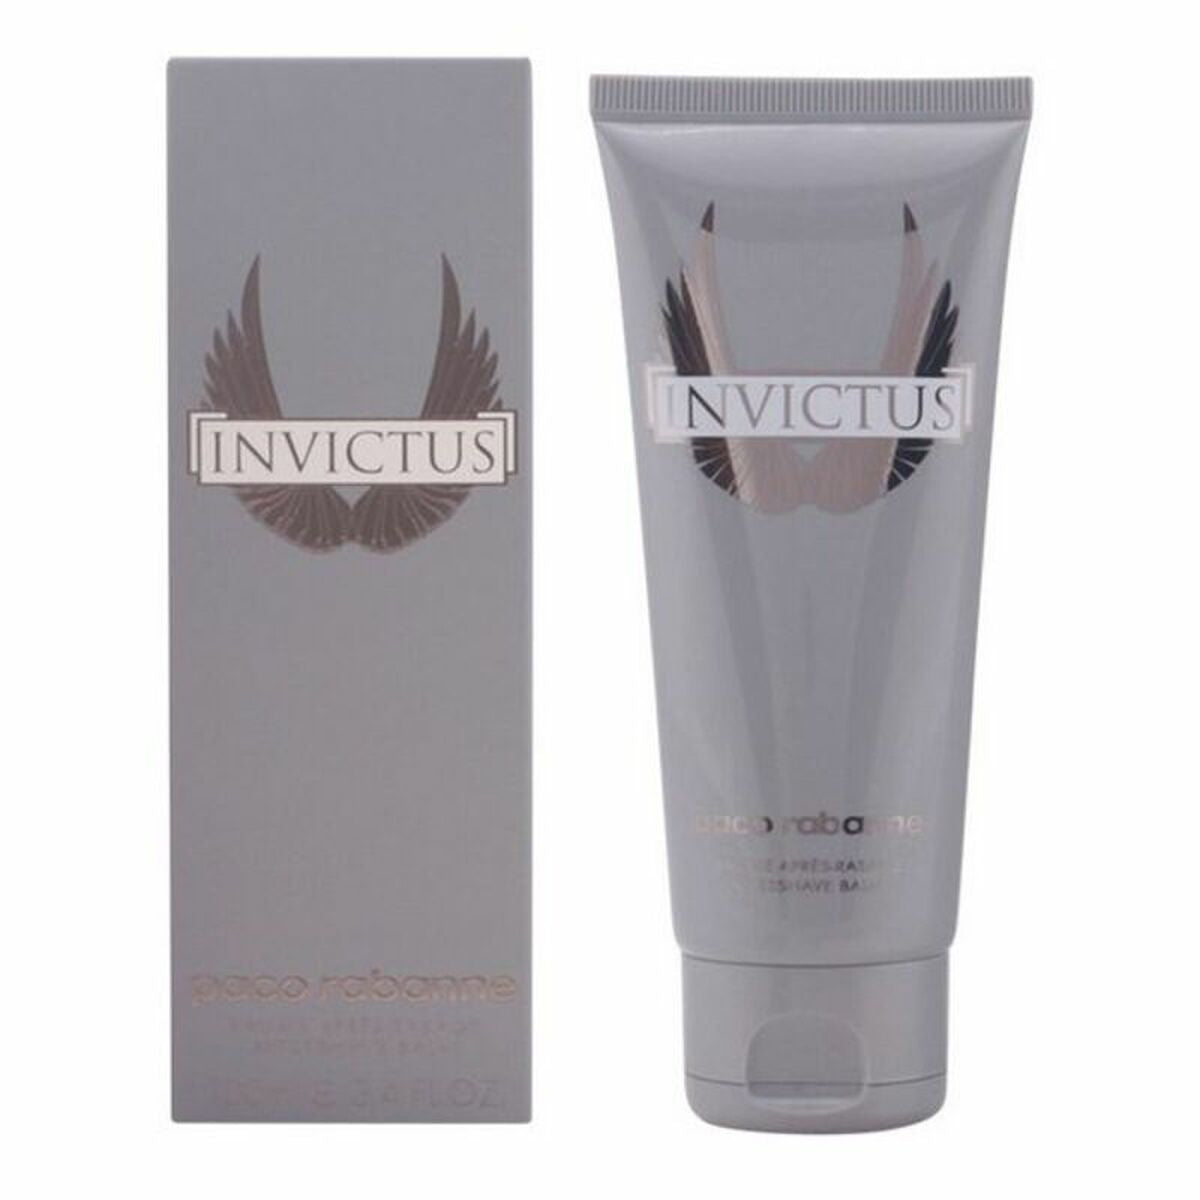 After Shave Balm Invictus Paco Rabanne (100 ml)